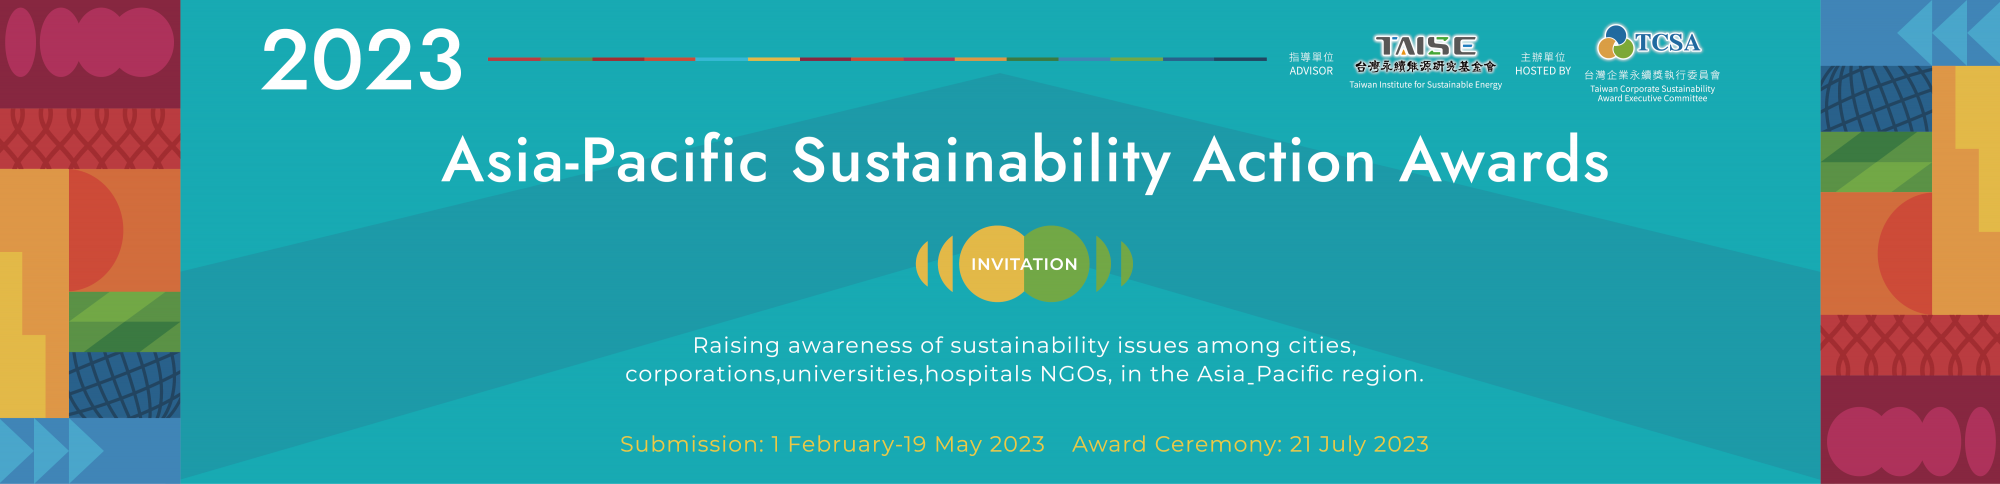 2023 Asia-Pacific Sustainability Action Awards 